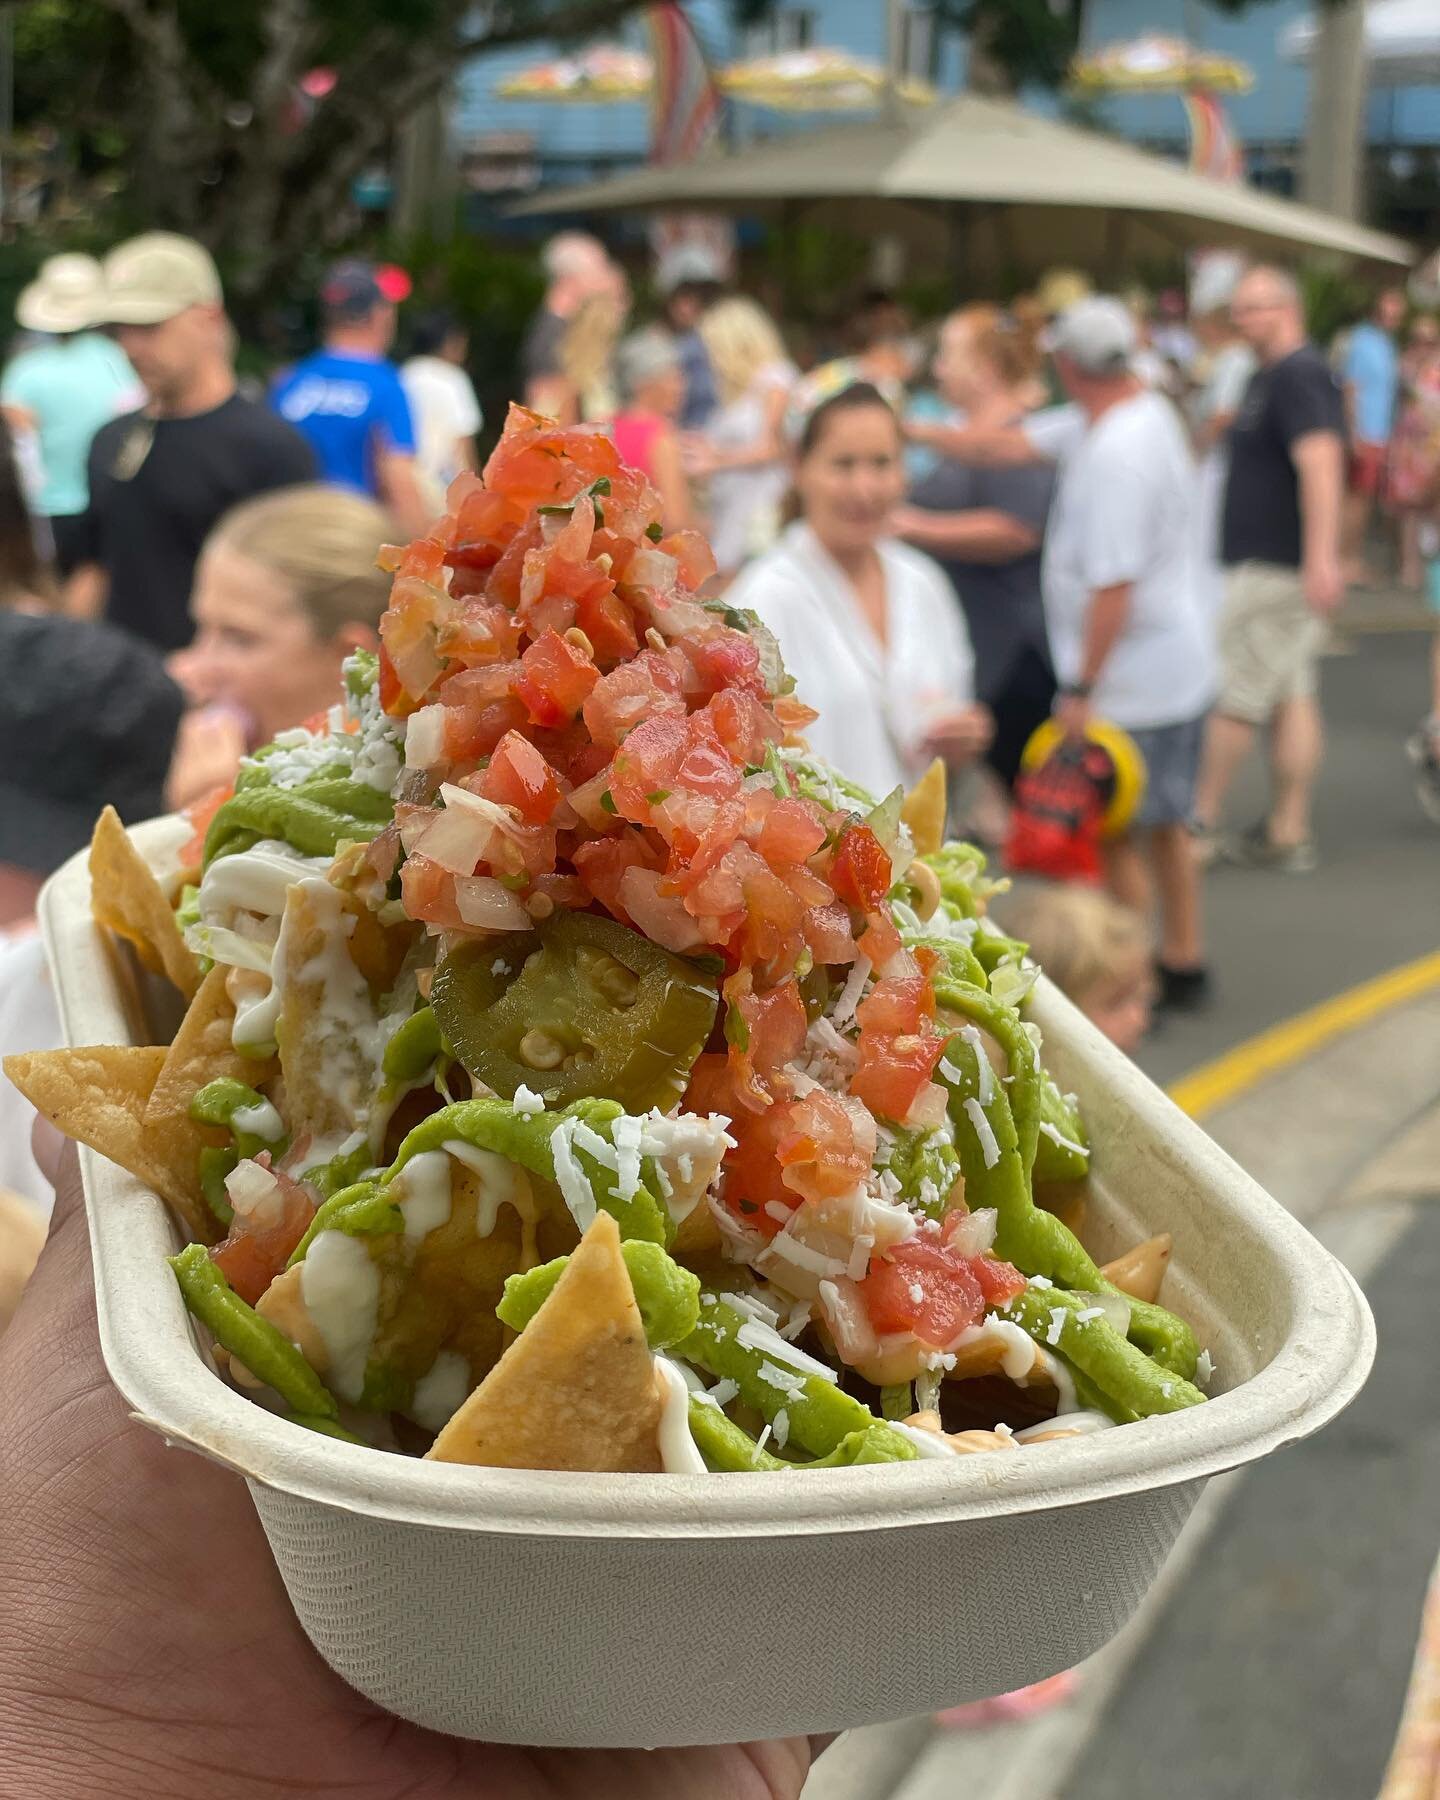 Craving some tacos? Come check out Holy Taco at Eumundi Markets! Our Caloundra Tacos are a fan favorite, and our Holy Nachos are the perfect shareable snack. 

#HolyTacoEumundi #PlantBasedTacos #VeganFoodie #TacoTuesday #TacoLove #EumundiMarkets #Vis